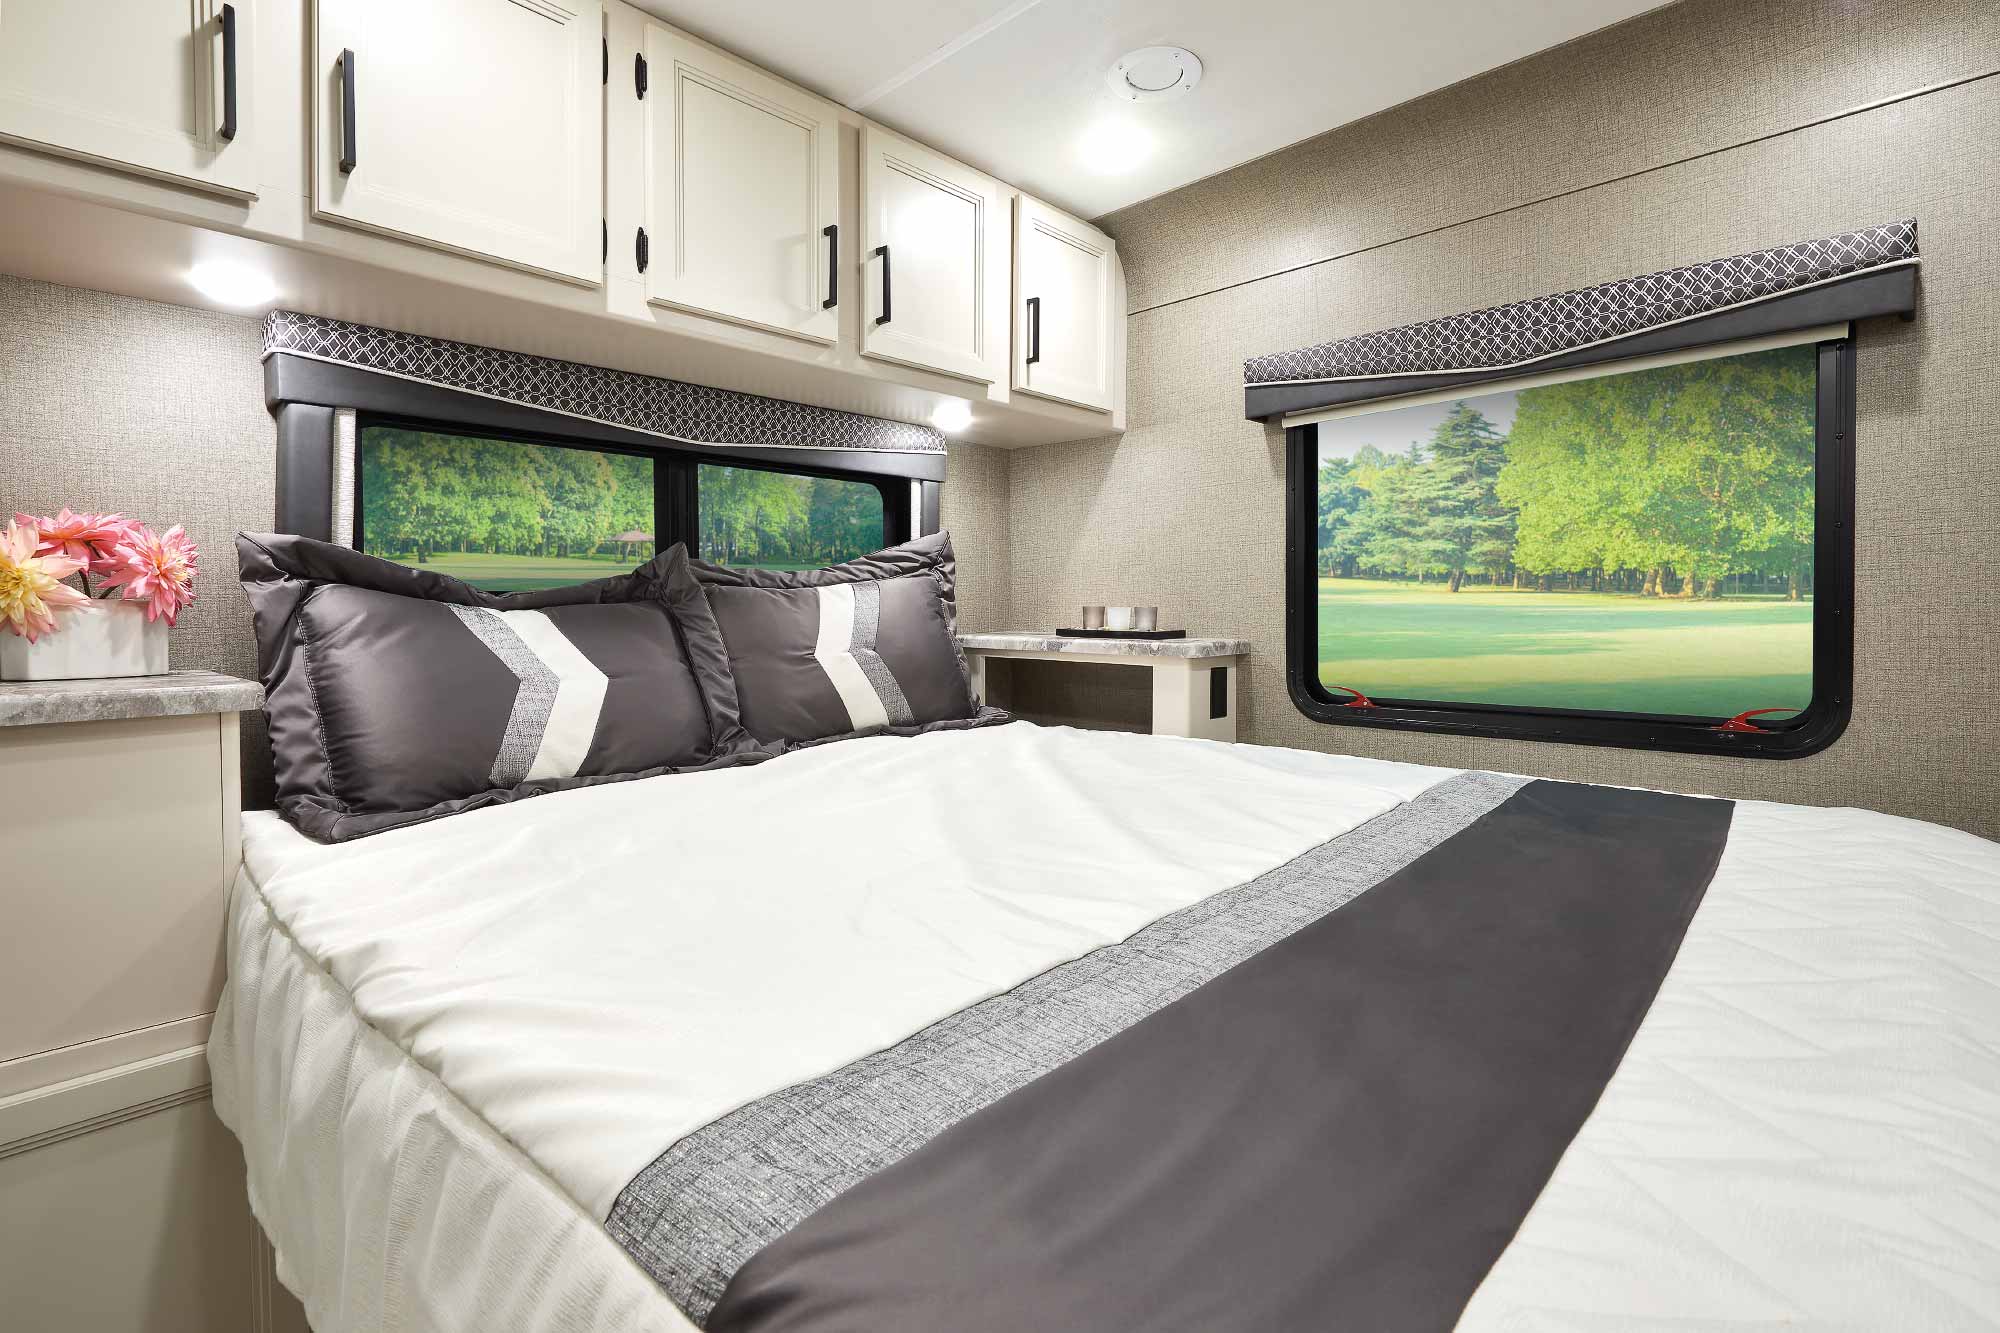 Thor Cau Class C Motorhomes, Class A Rv With King Size Bed